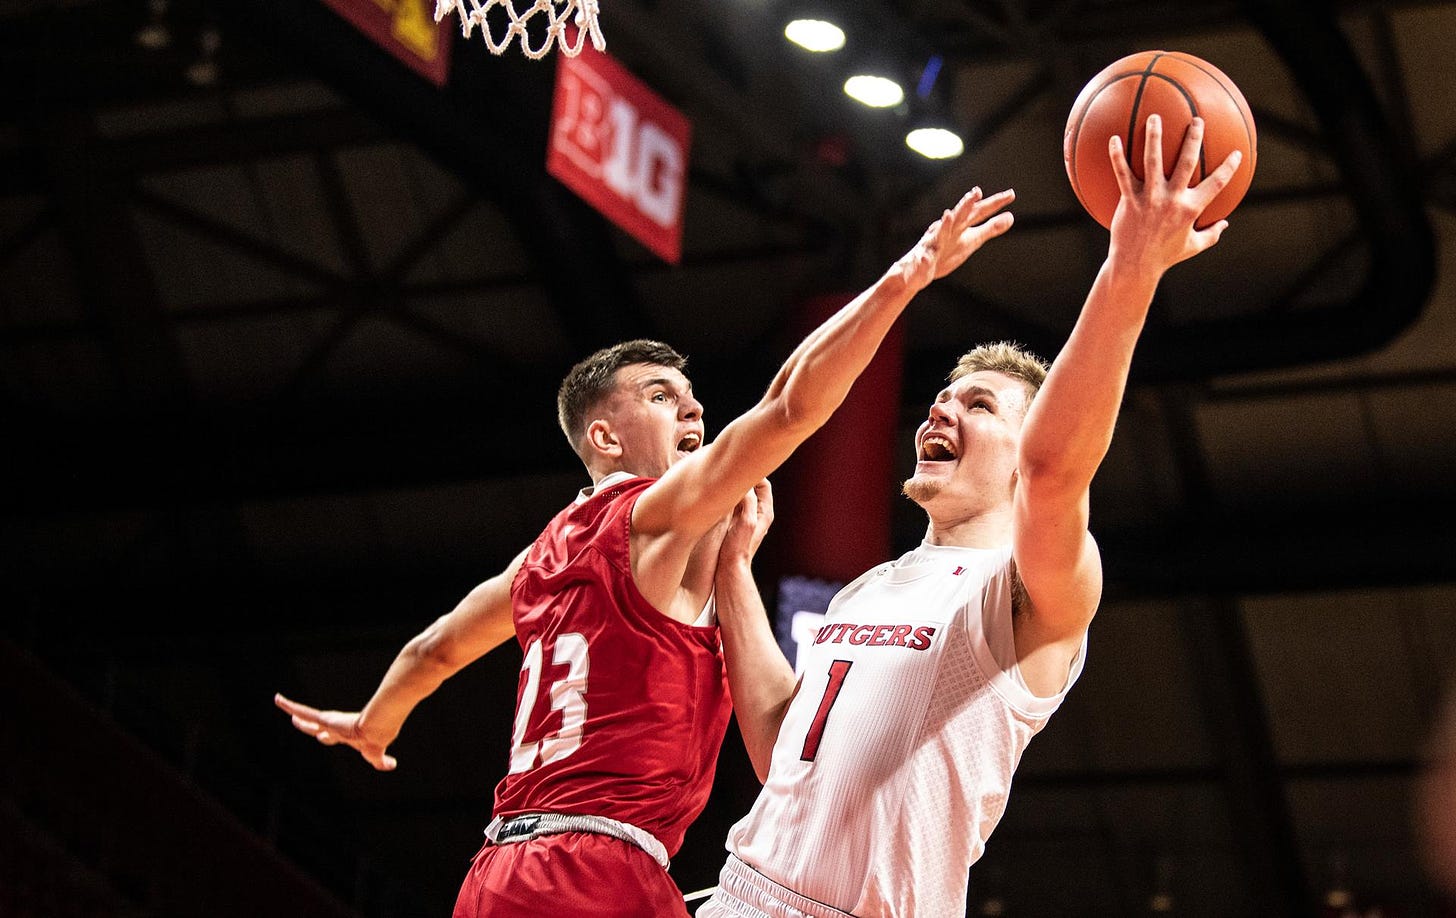 Swedish forward Oskar Palmquist (#1) is playing a larger role for Rutgers after Mawot Mag’s injury. (Photo by Ben Solomon / courtesy of Rutgers athletics)